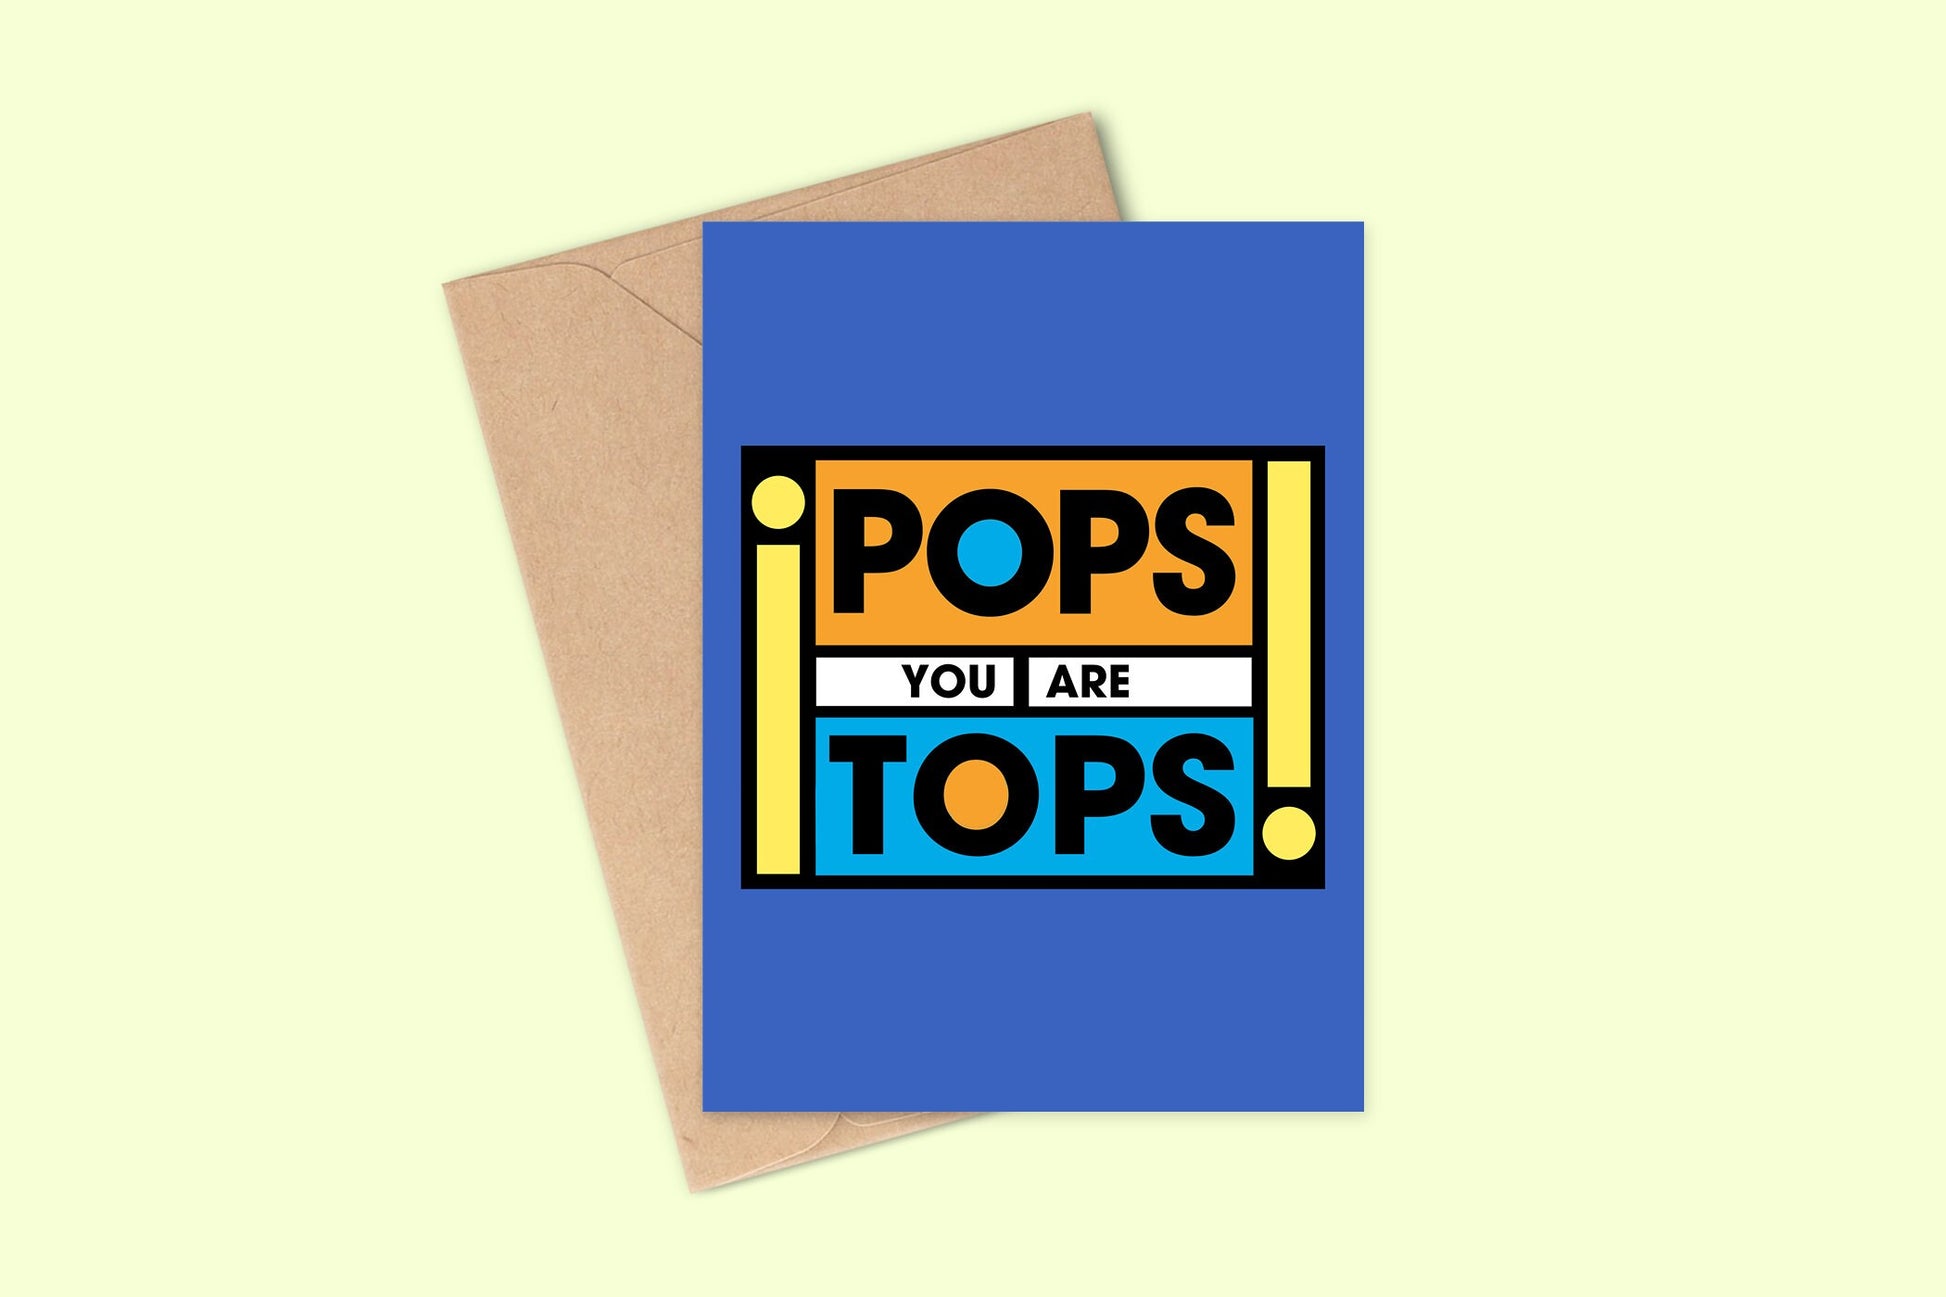 Top Of The Pops Father's Day Card, Birthday Card For Dad, Funny Card, Father's Day Card, Cards For Dad, Pops You Are Tops